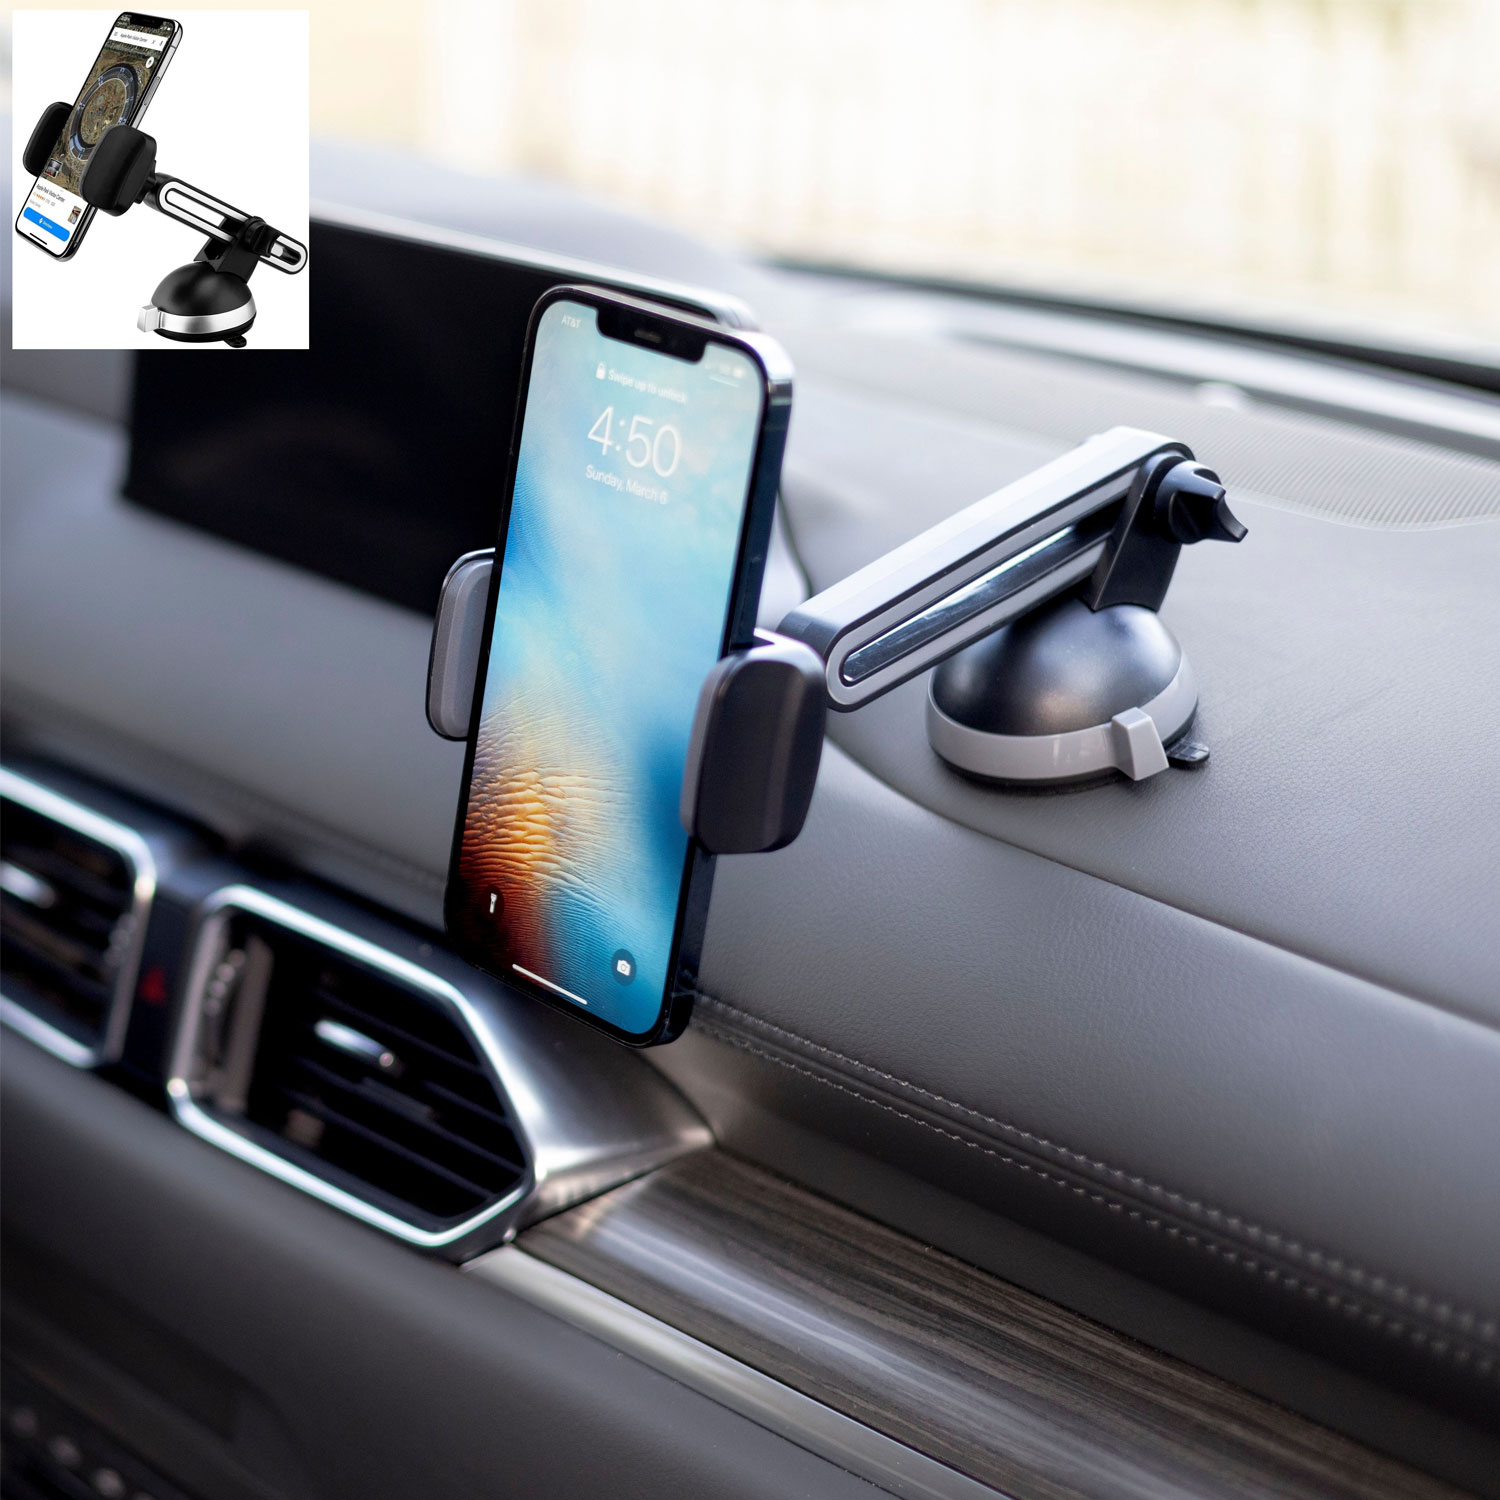 Universal 360° All-in-1 Design Car Mount For Dashboard/Windshield & Airvent